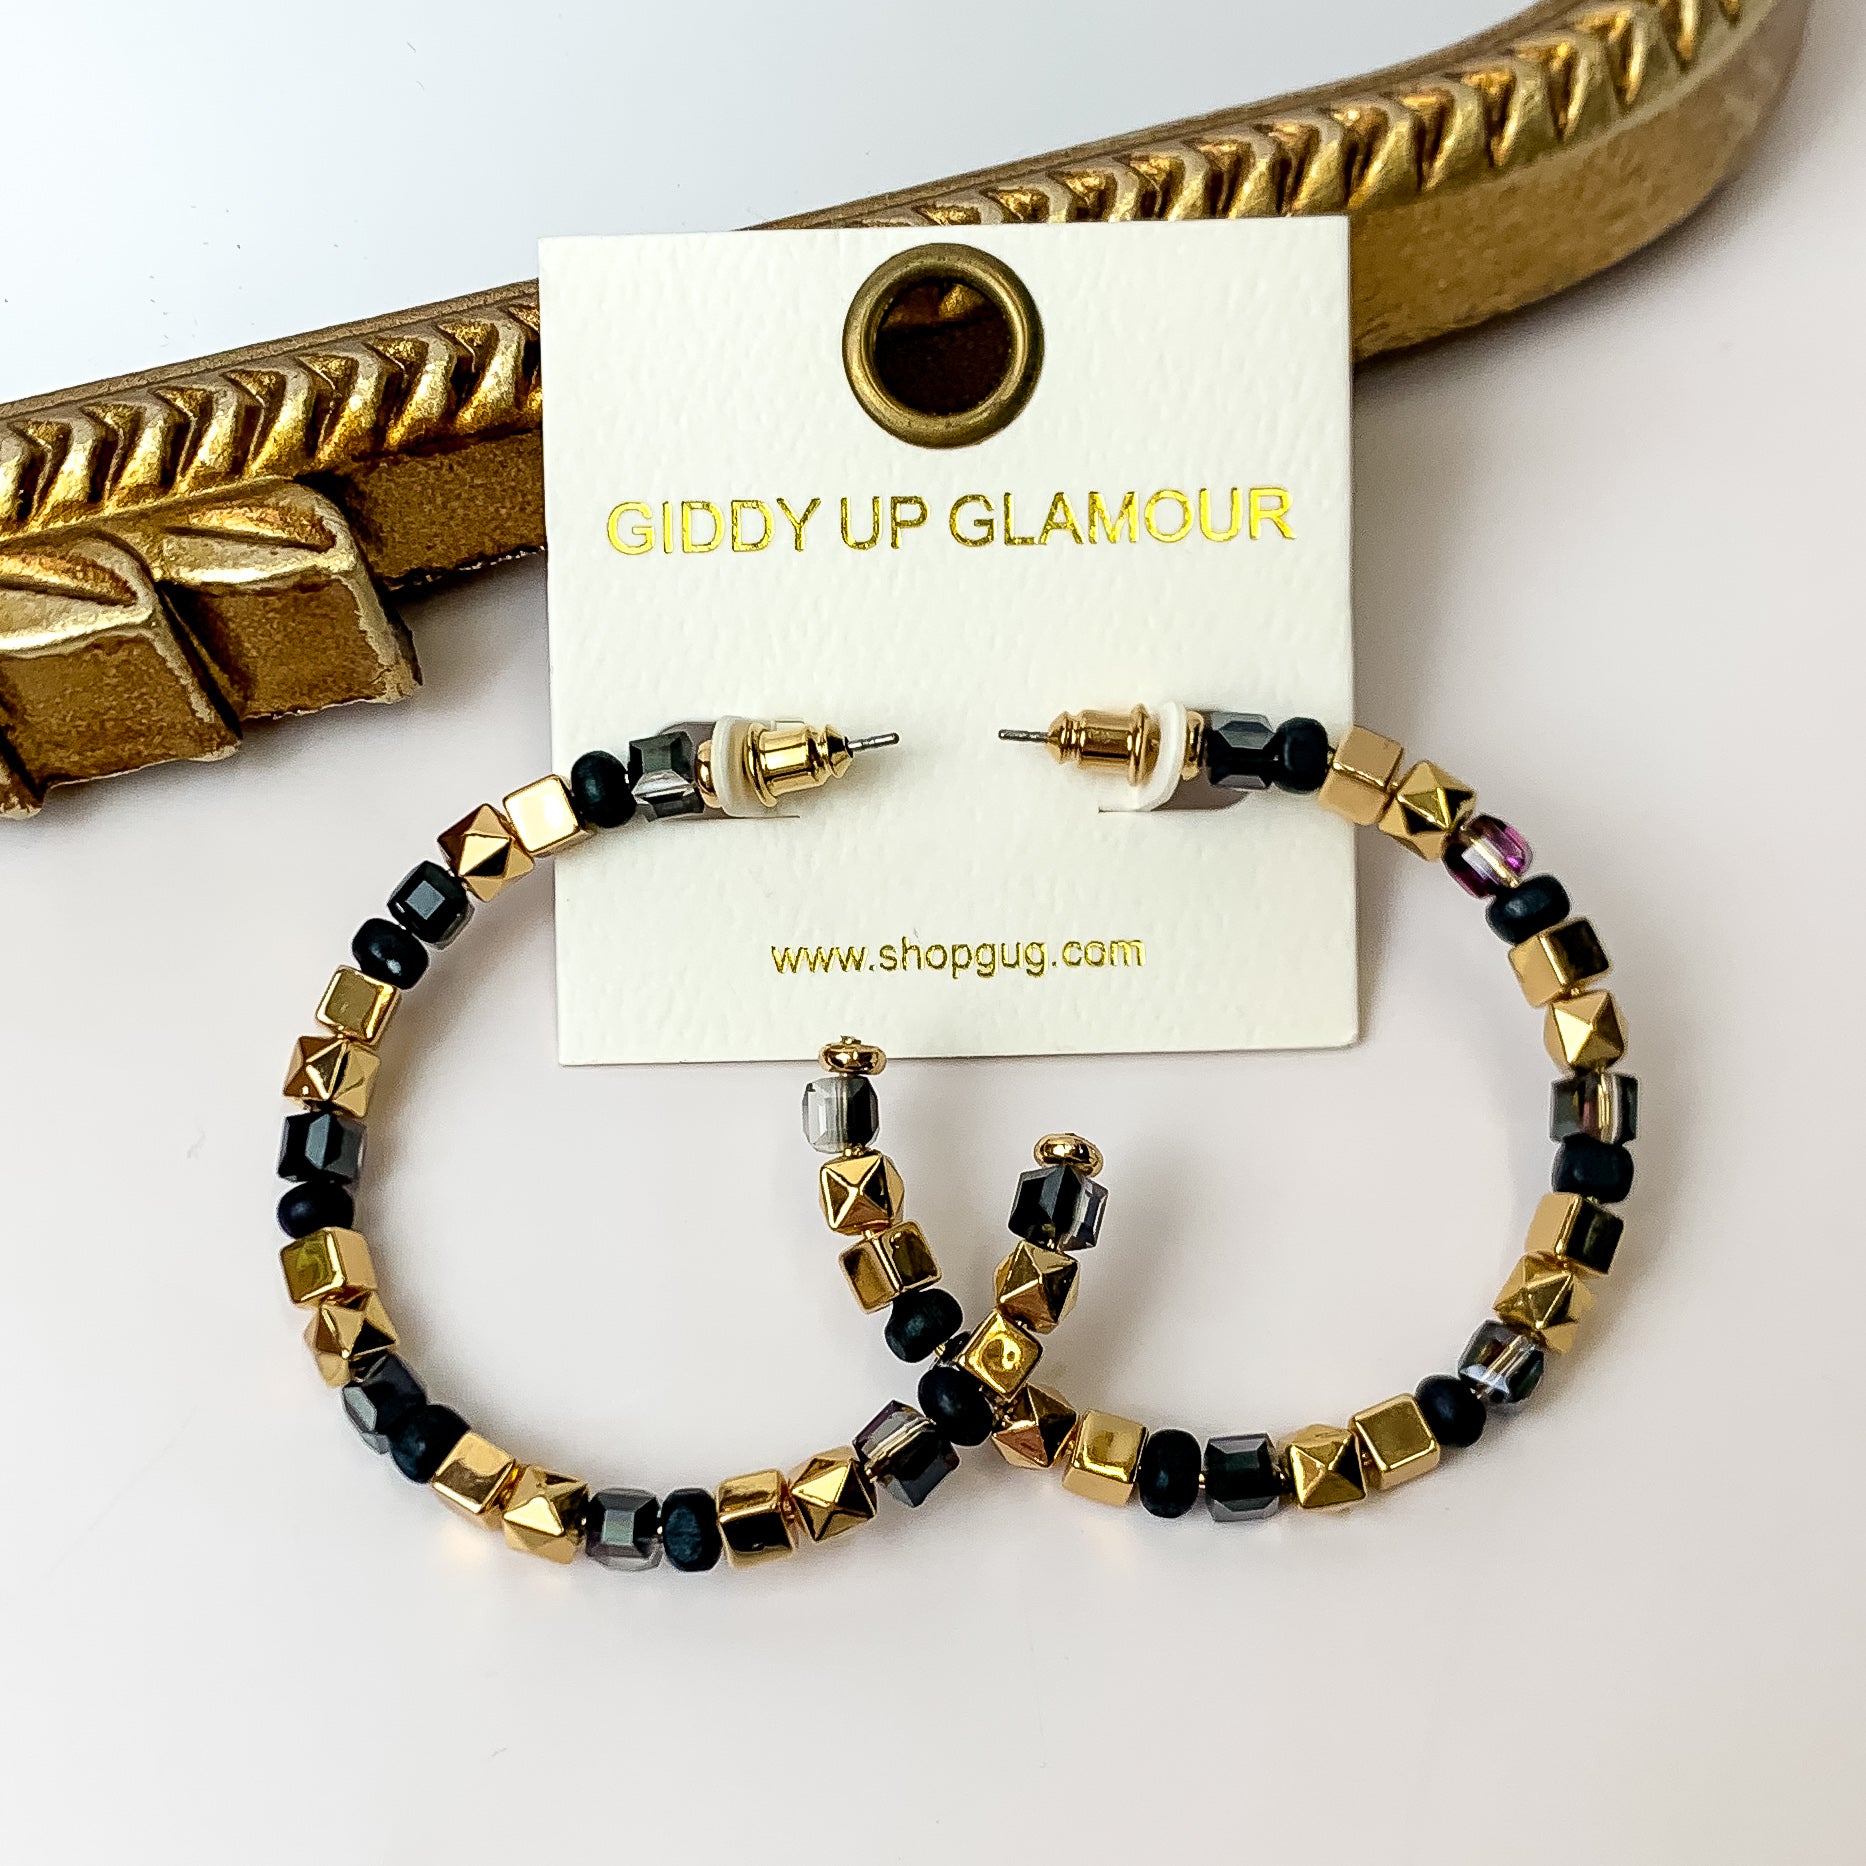 A pair of gold and black beaded hoop earrings on an ivory earring card. These earrings are pictured on a white background with a gold mirror.